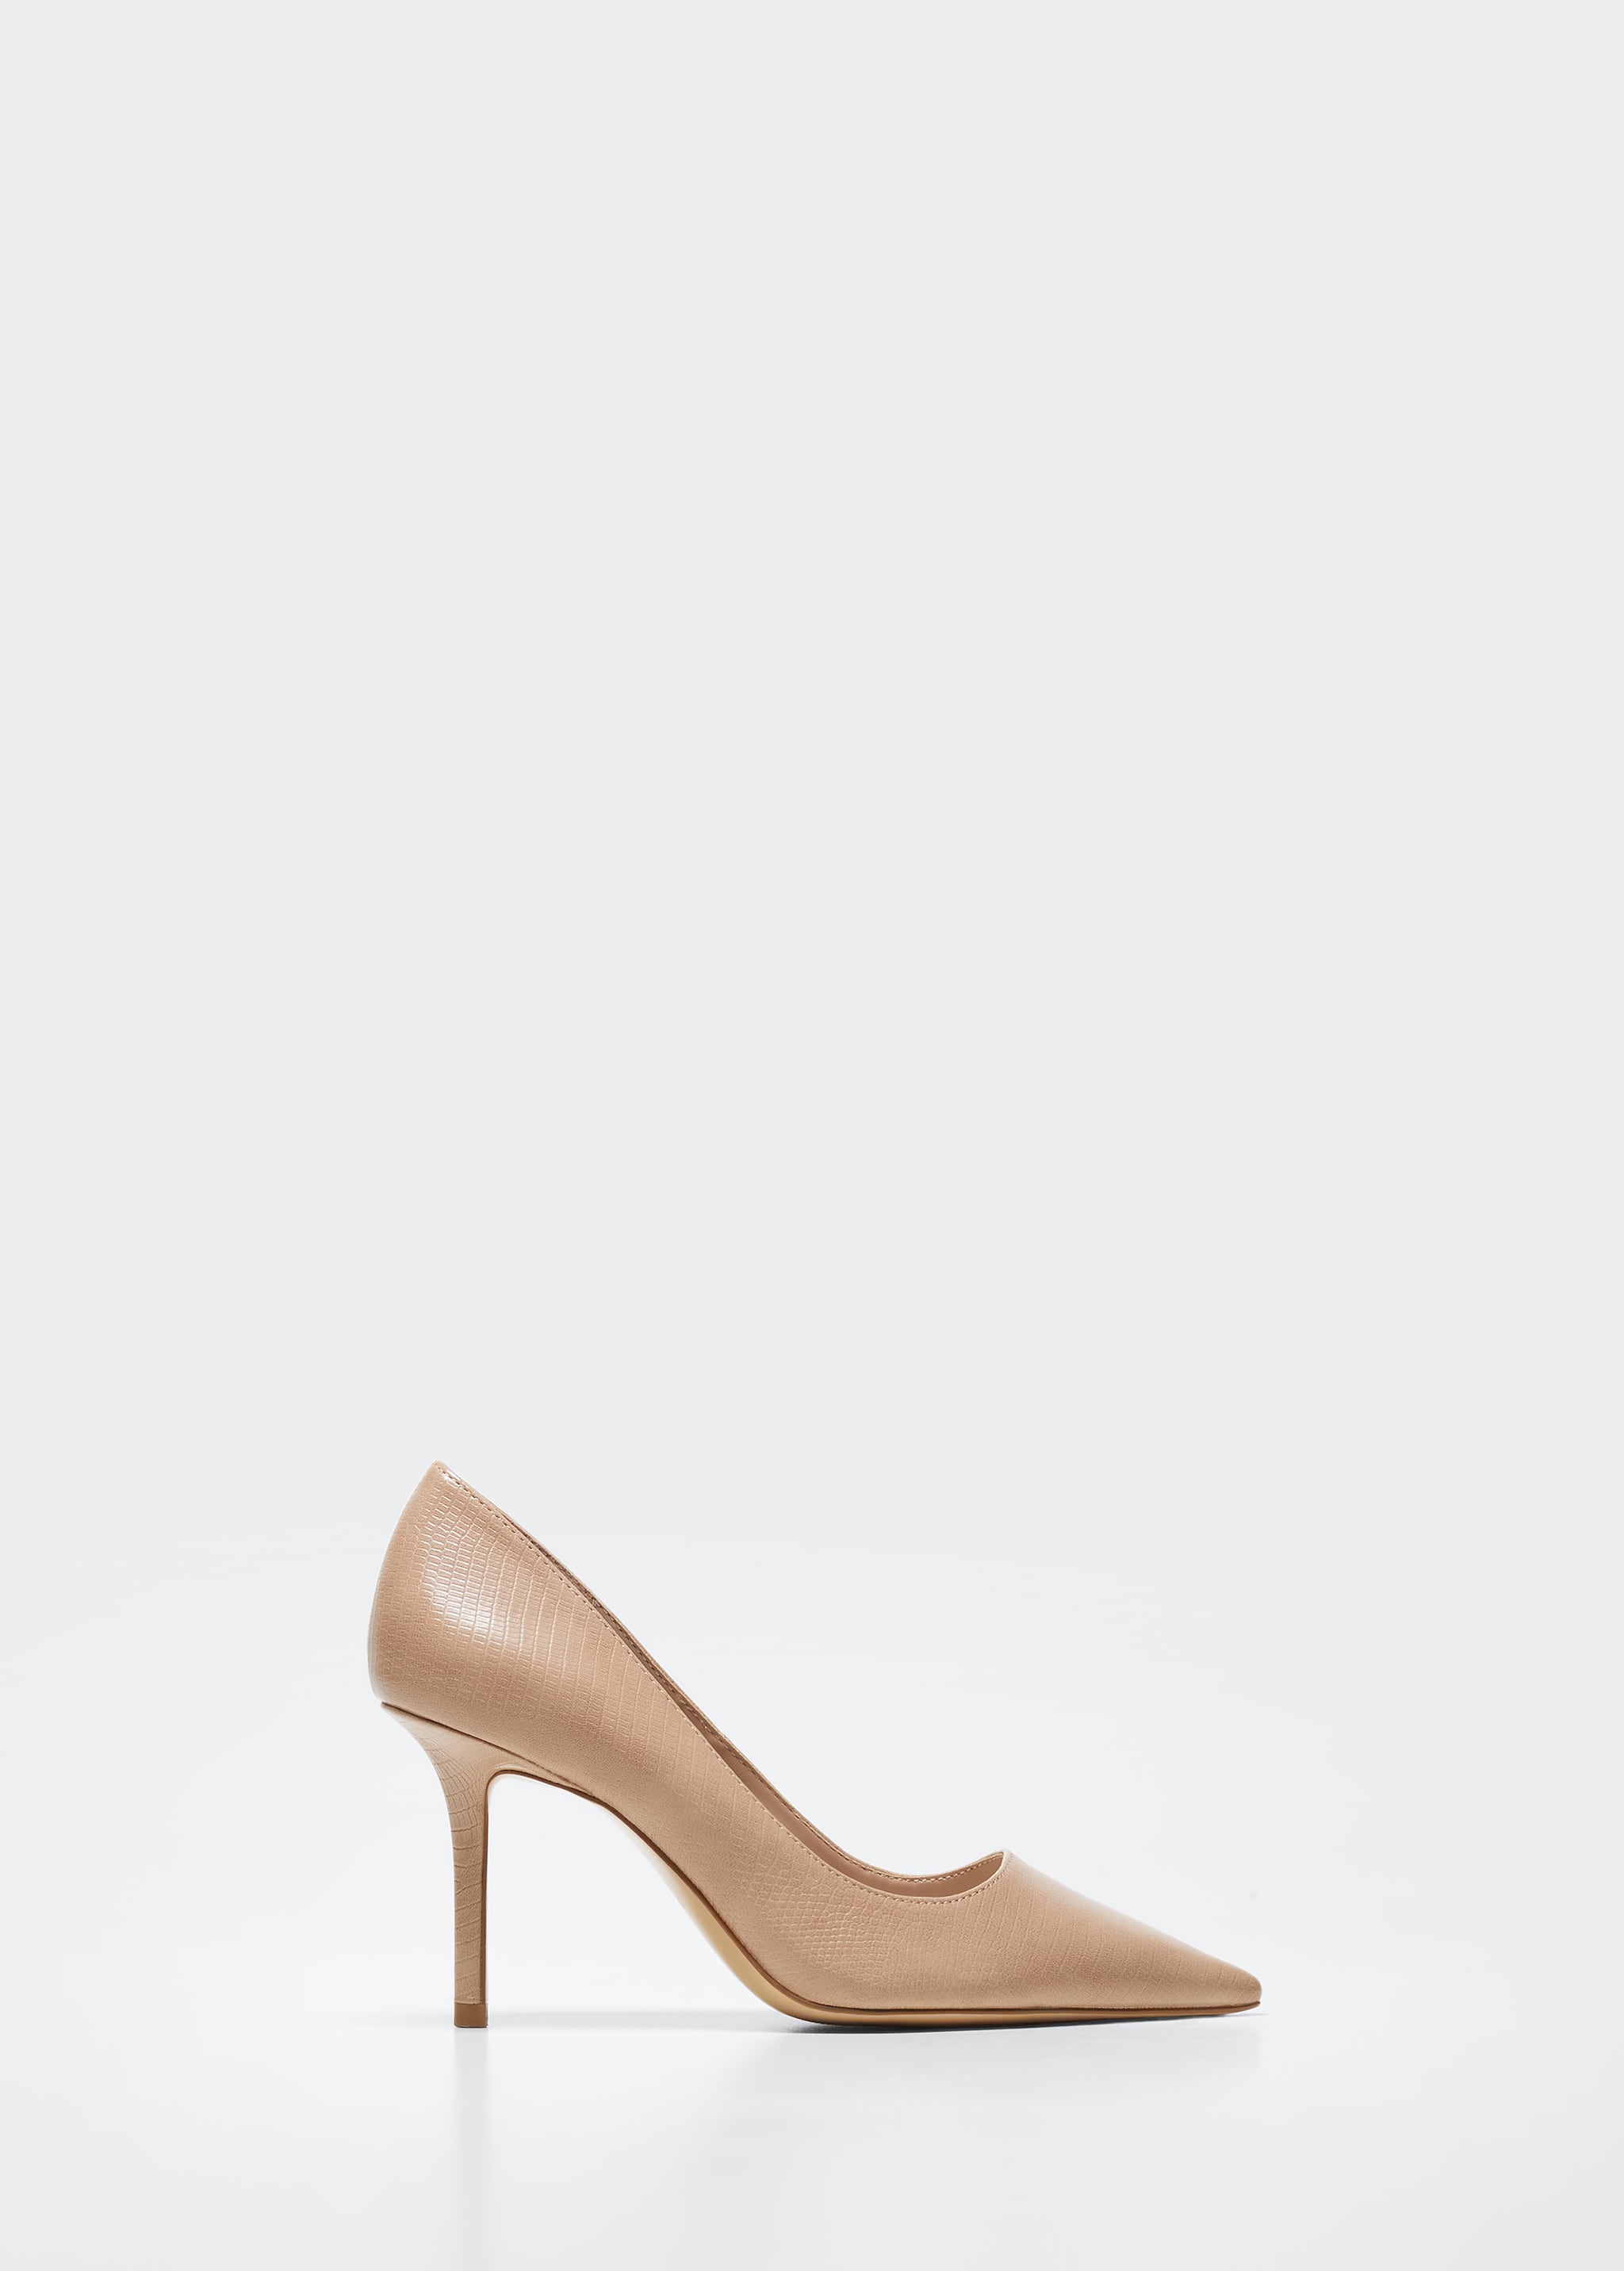 Pointed toe pumps - Article without model